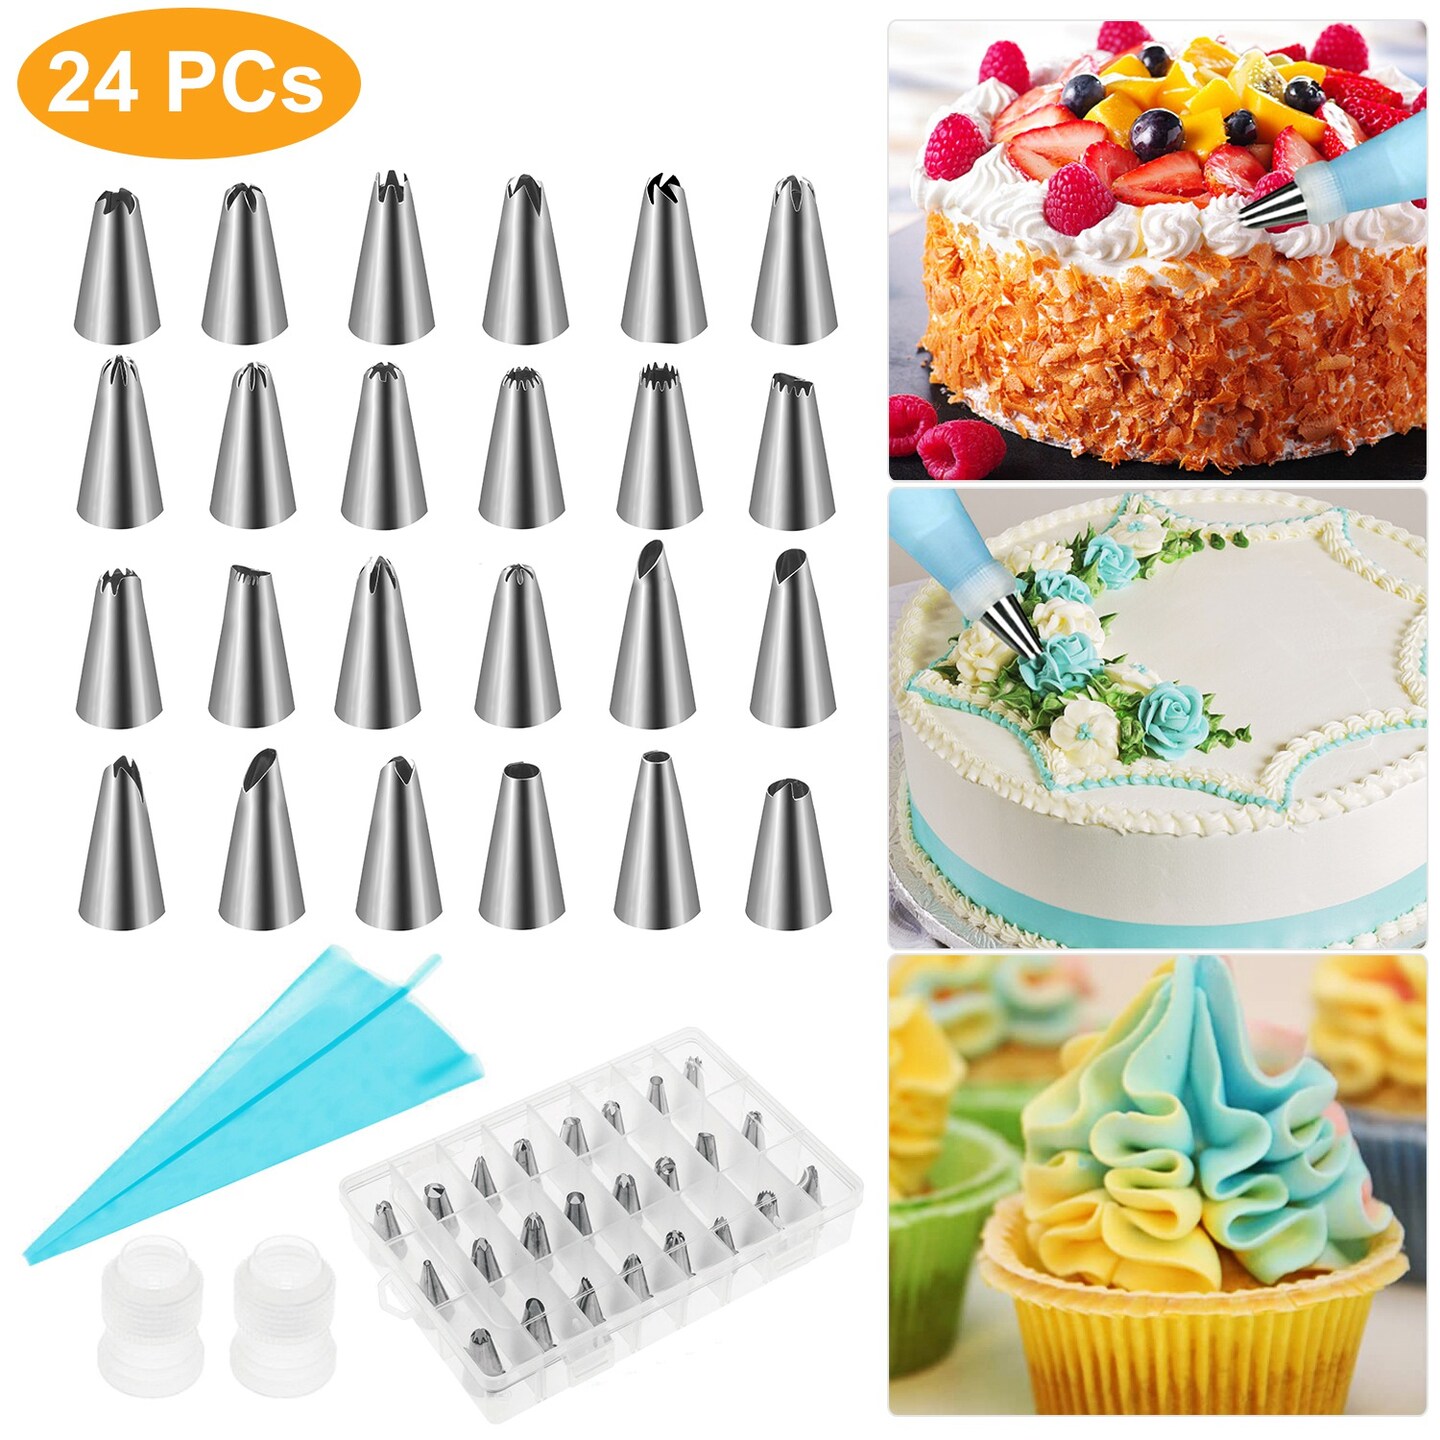 24Pcs Stainless steel Icing Piping Nozzles Pastry Tips